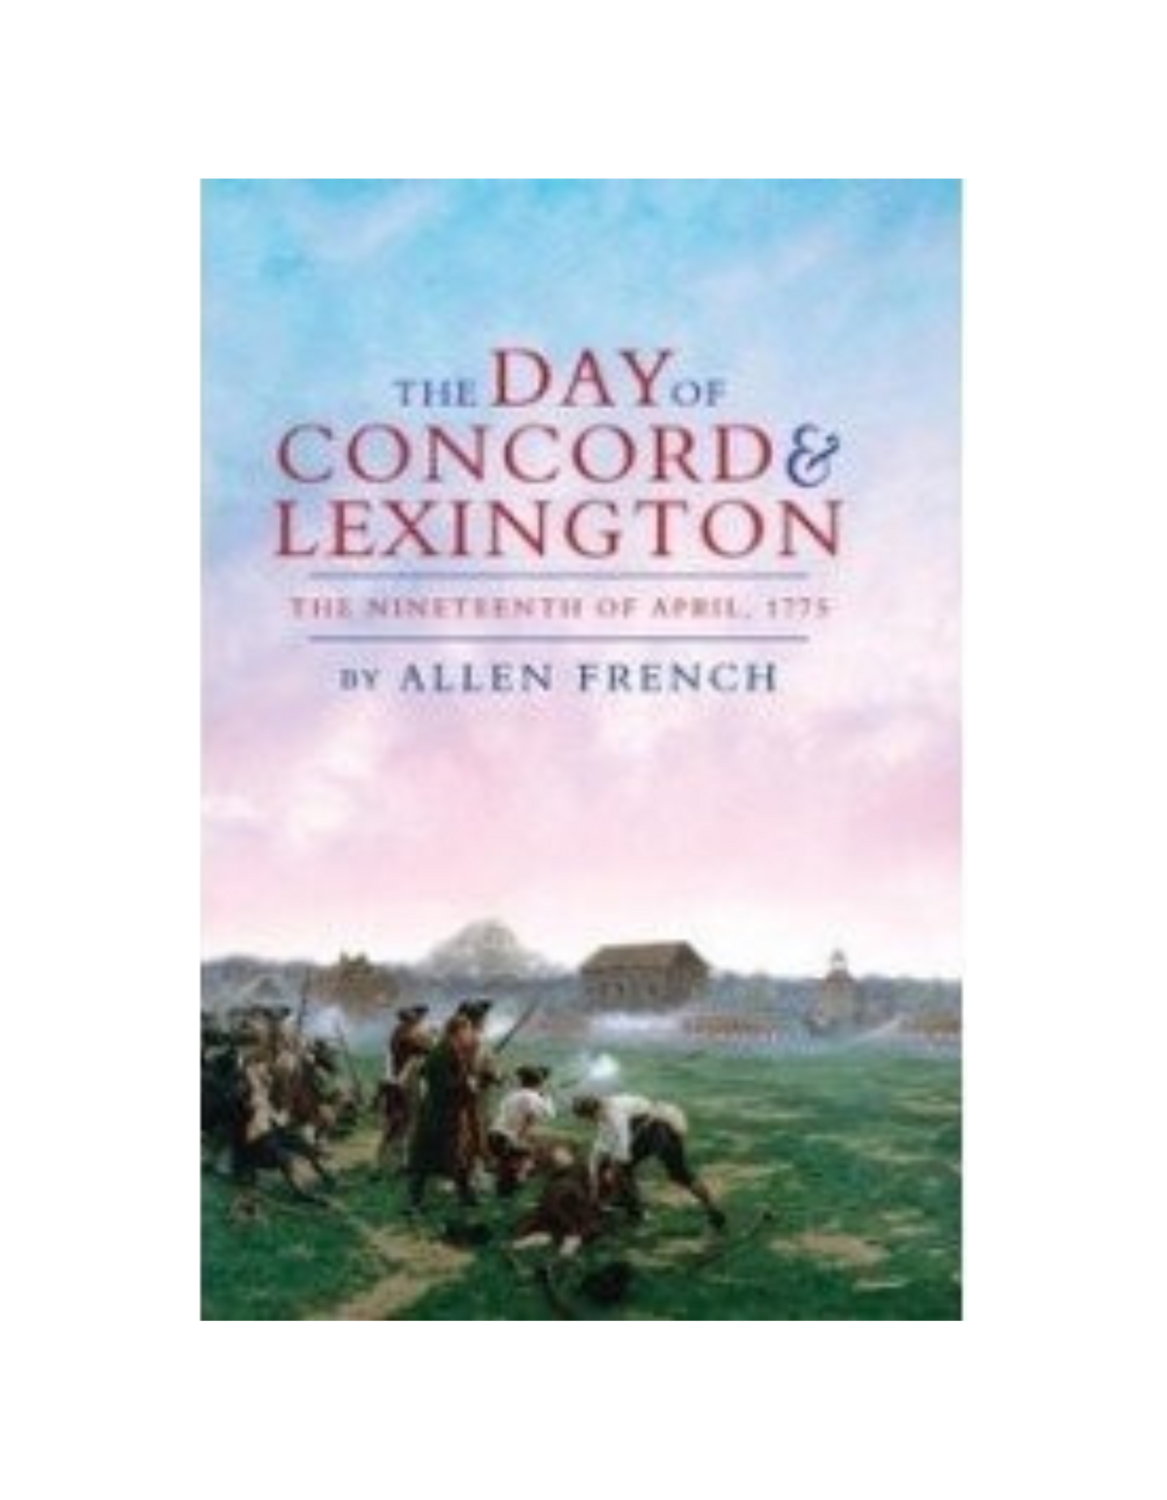 Day of Concord and Lexington, The (1925)